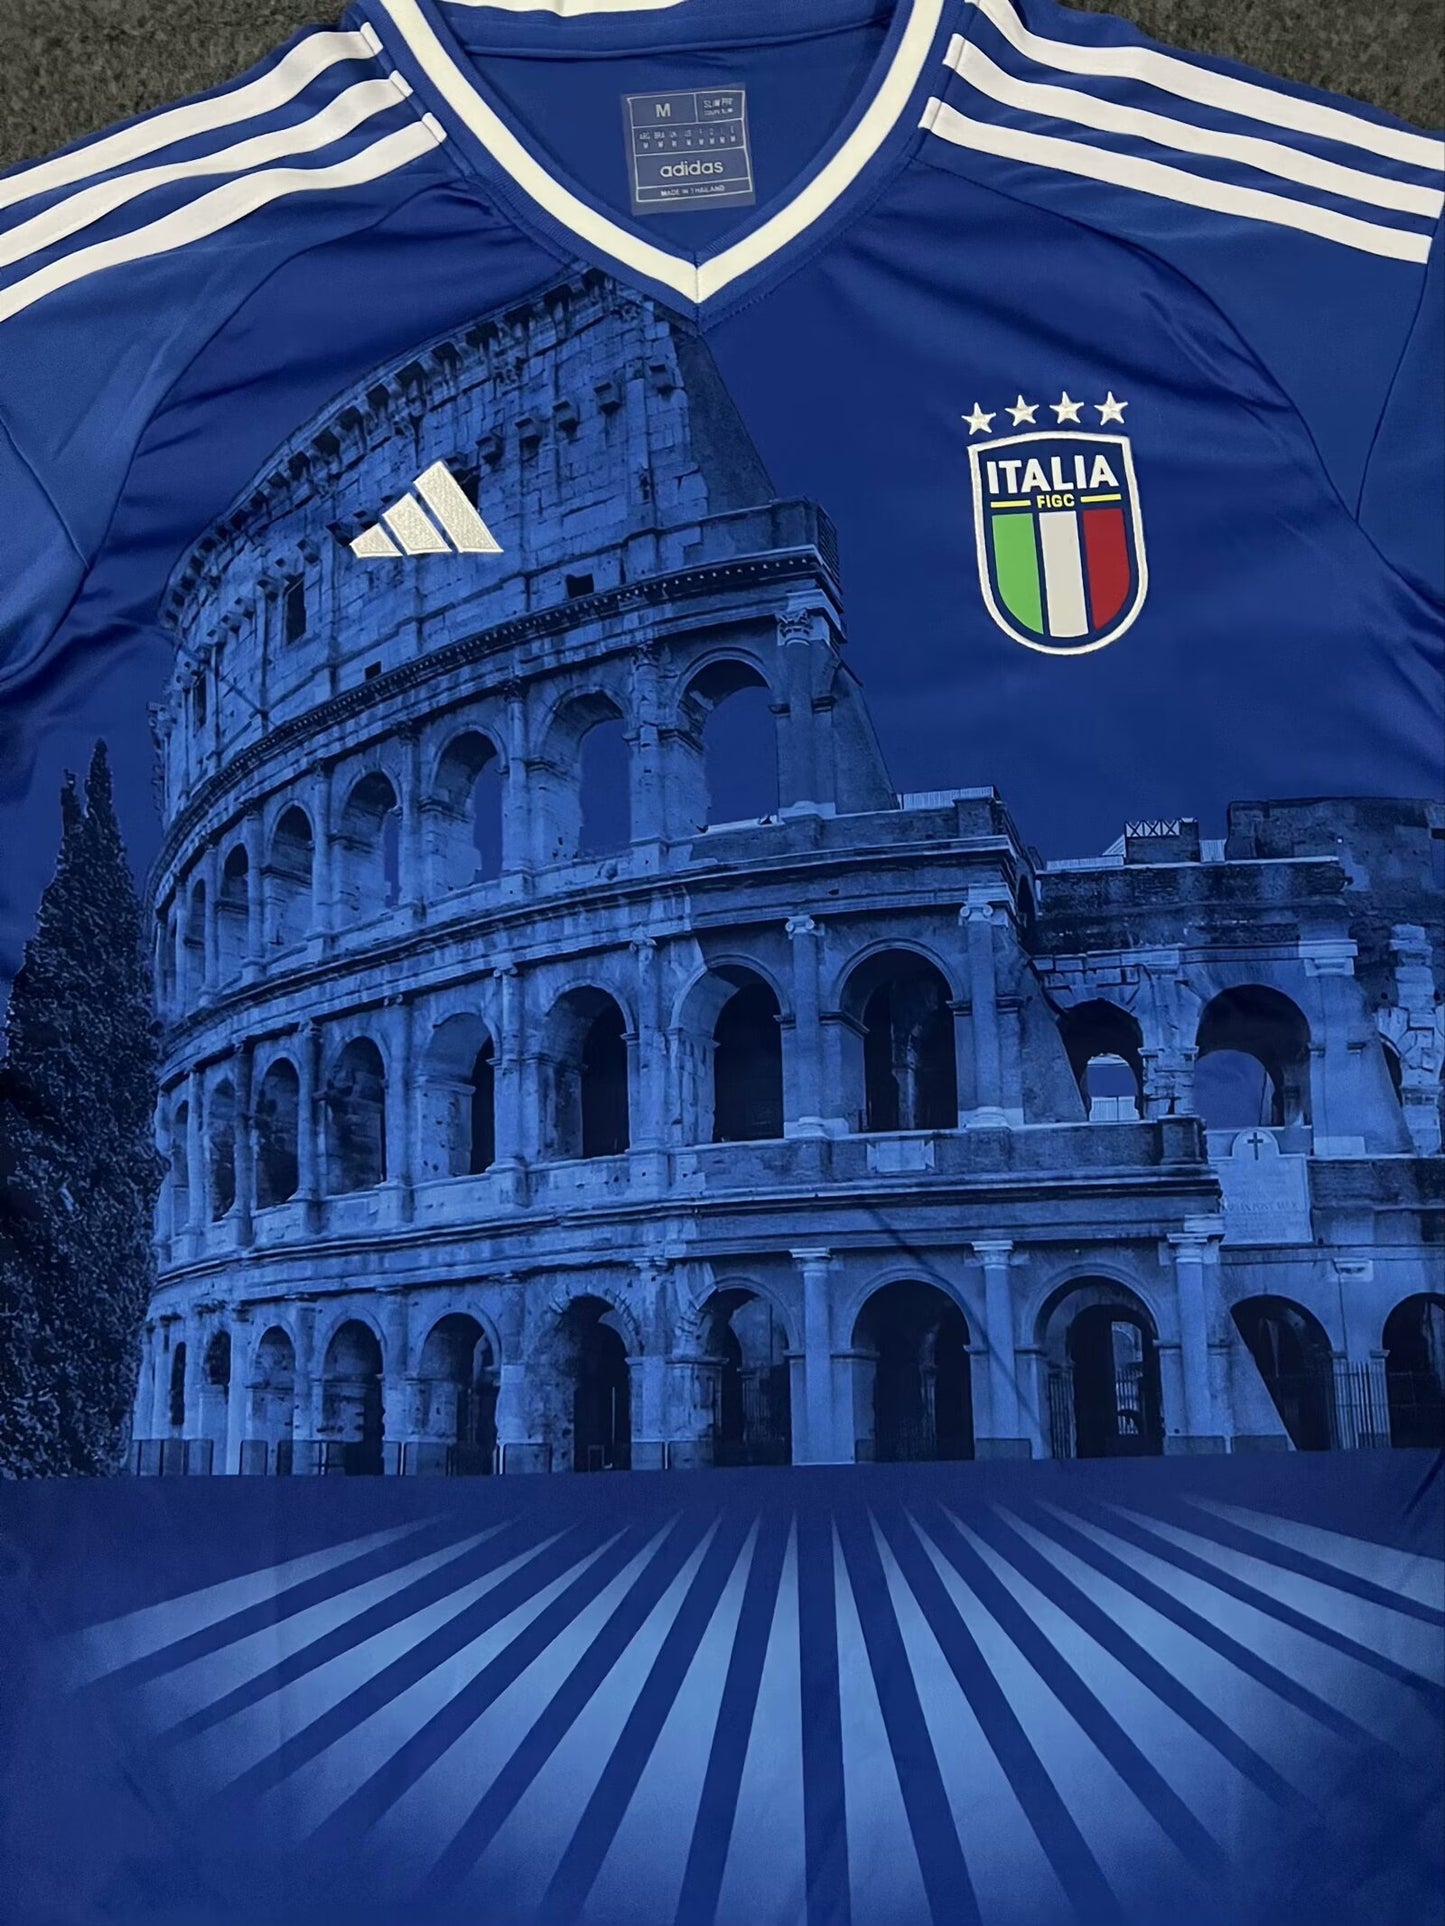 Versace Italy National Team ‘Colosseum’ Authentic Adidas Fan Version Jersey - Blue